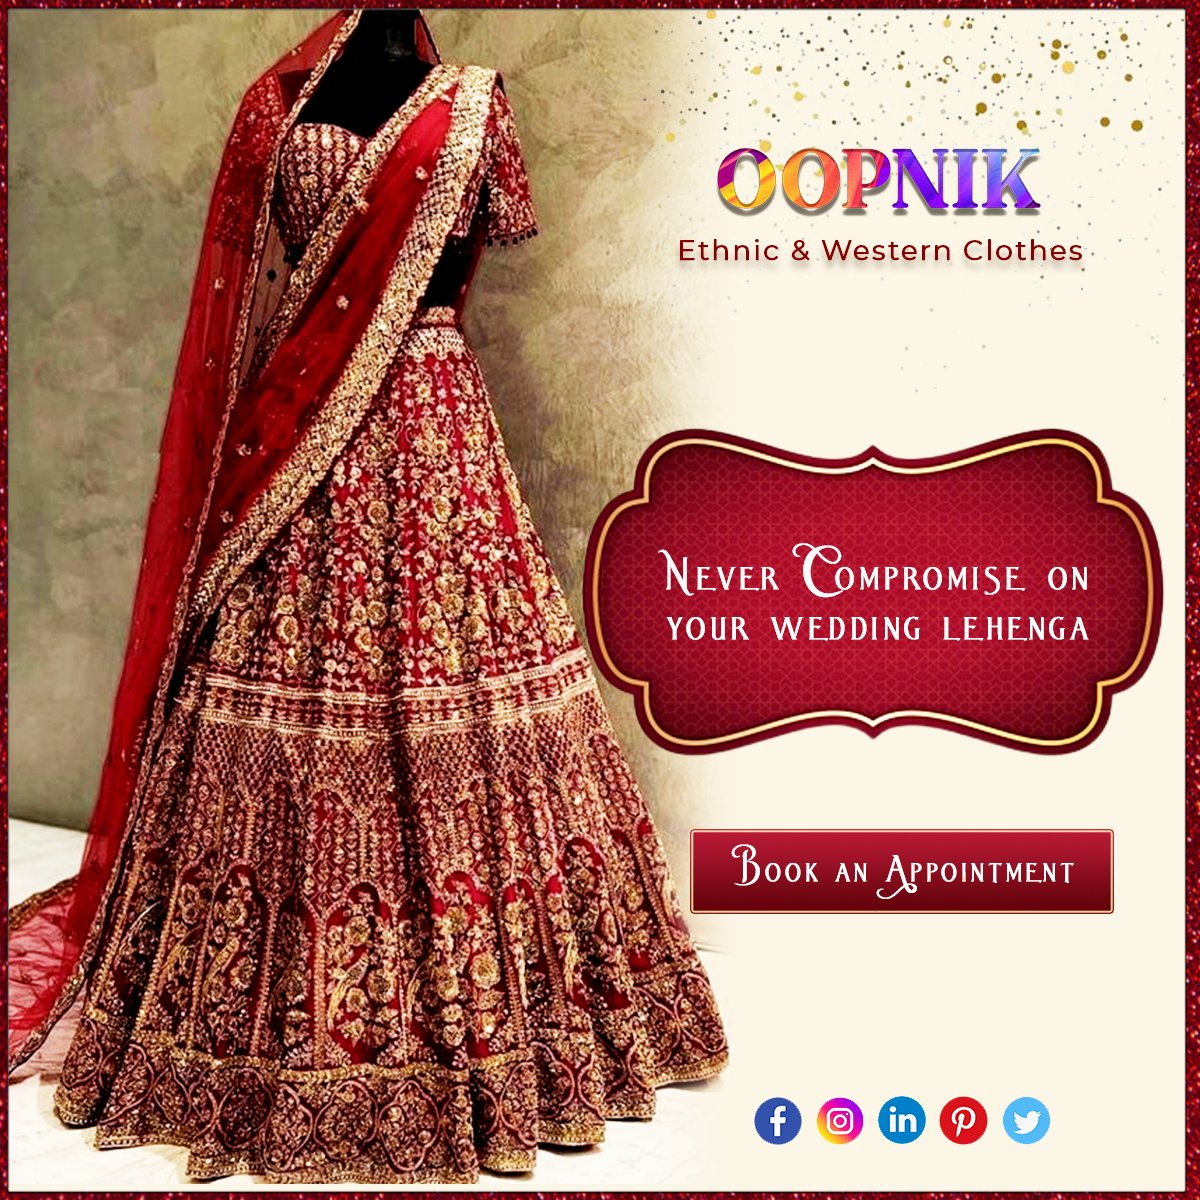 Ready to make your special day more memorable with our bridal wear collection because we want you to be authentic.

#oopnik #bridallehenga #lehenga #lehengacholi #weddinglehenga #indianbride #bridalmakeup #bridalwear #weddingdress #designerlehenga #lehengalove #wedding #bride